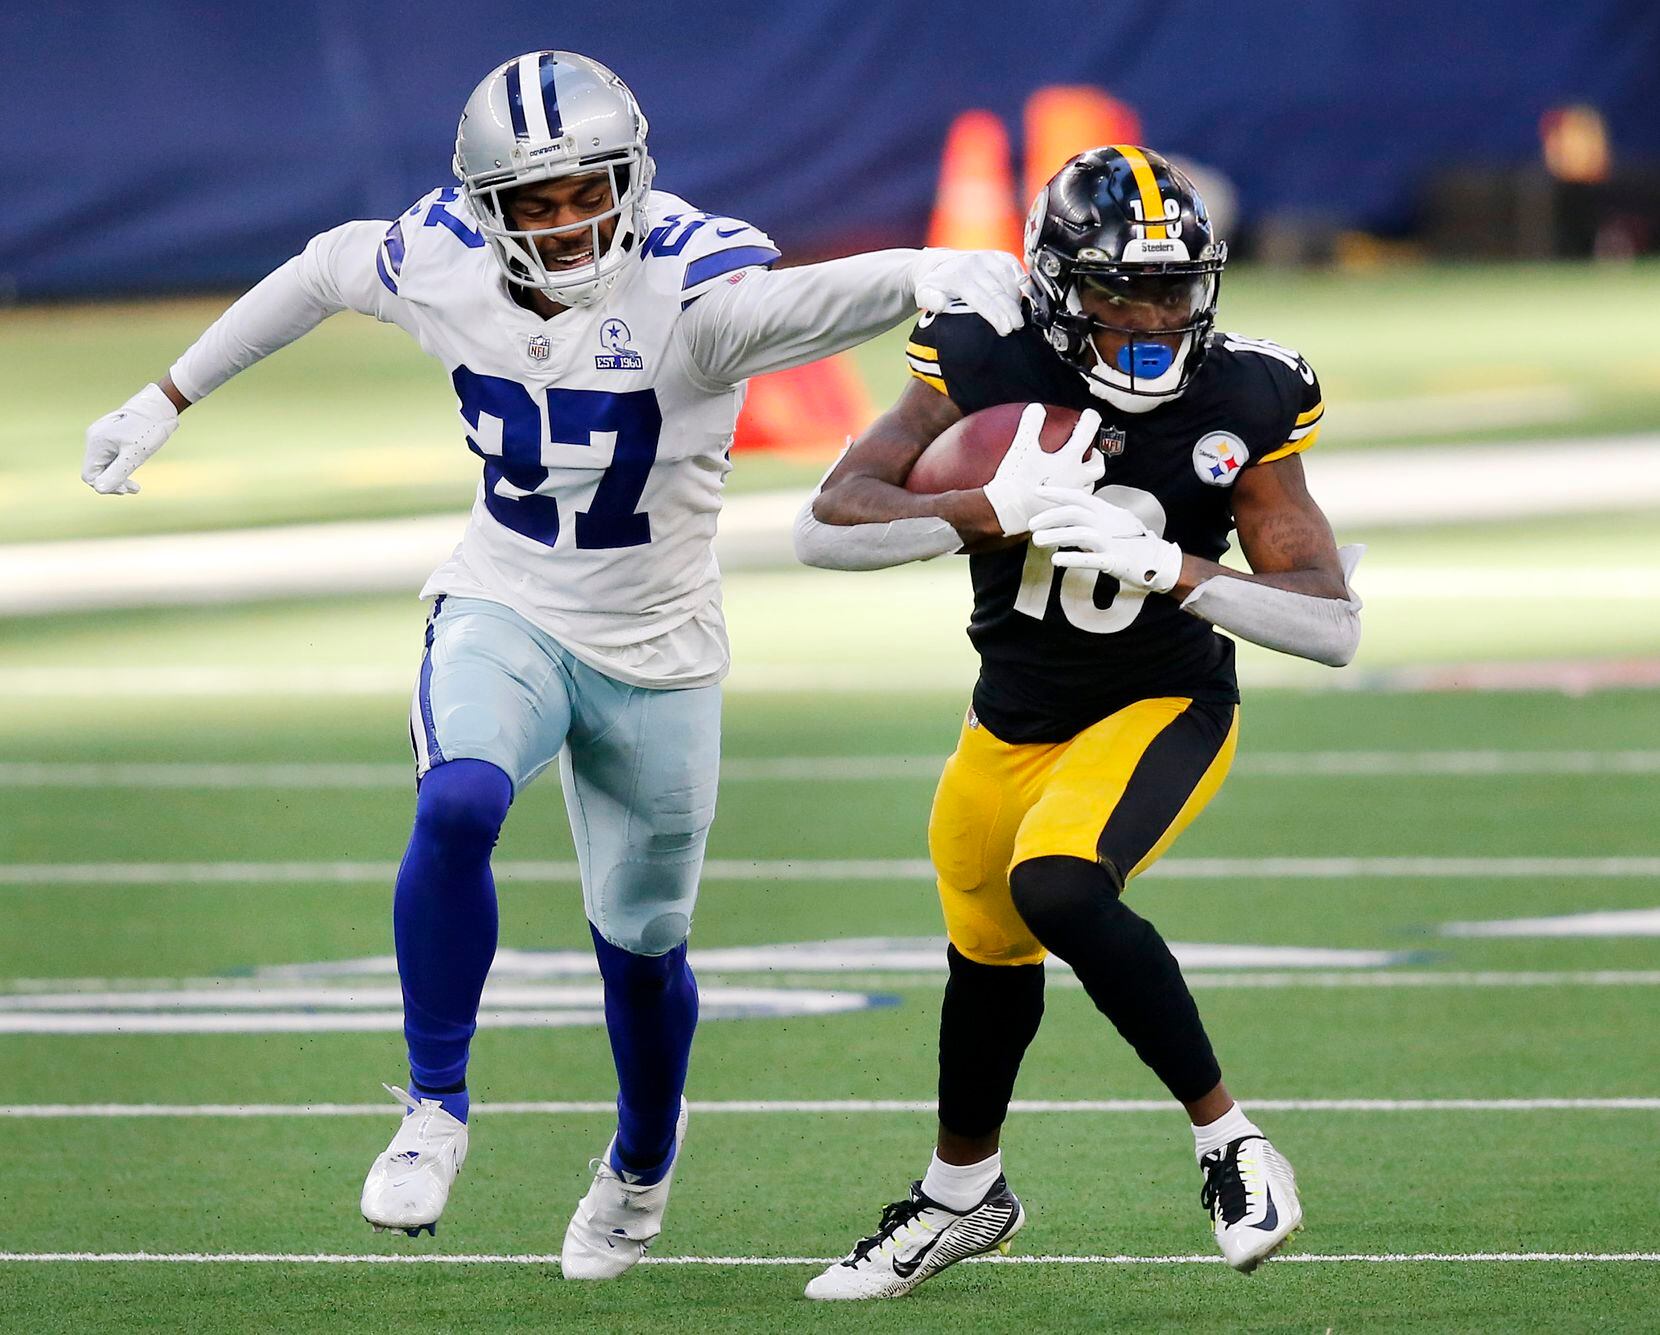 Dallas Cowboys cornerback Trevon Diggs (27) misses a tackle of Pittsburgh Steelers wide receiver Diontae Johnson (18) during the second quarter at AT&T Stadium in Arlington, Texas Sunday, November 8, 2020. (Tom Fox/The Dallas Morning News)